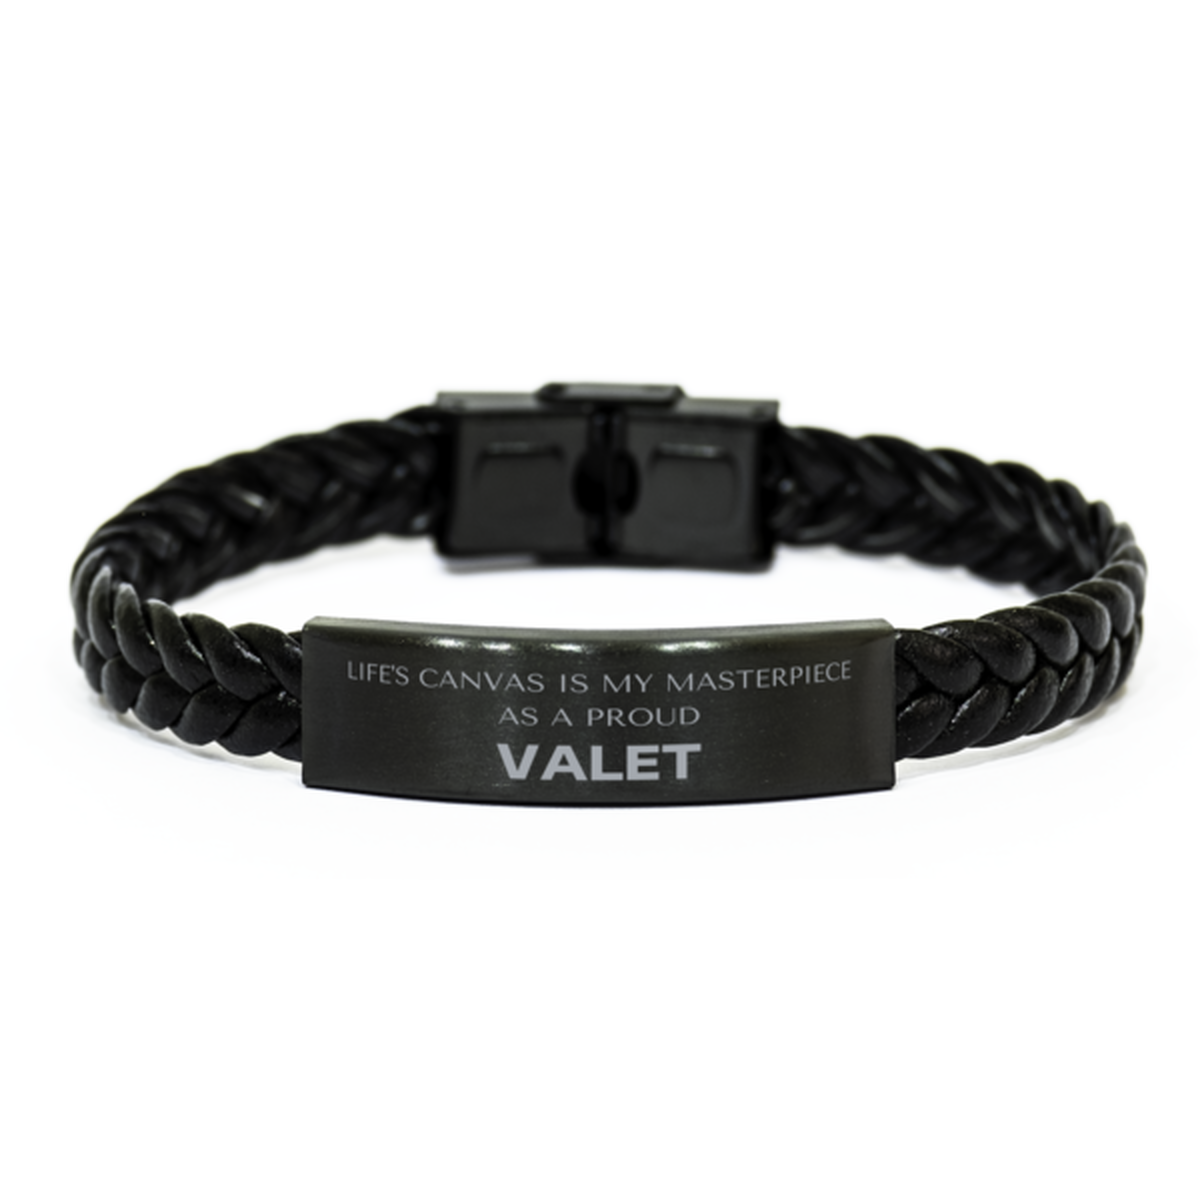 Proud Valet Gifts, Life's canvas is my masterpiece, Epic Birthday Christmas Unique Braided Leather Bracelet For Valet, Coworkers, Men, Women, Friends